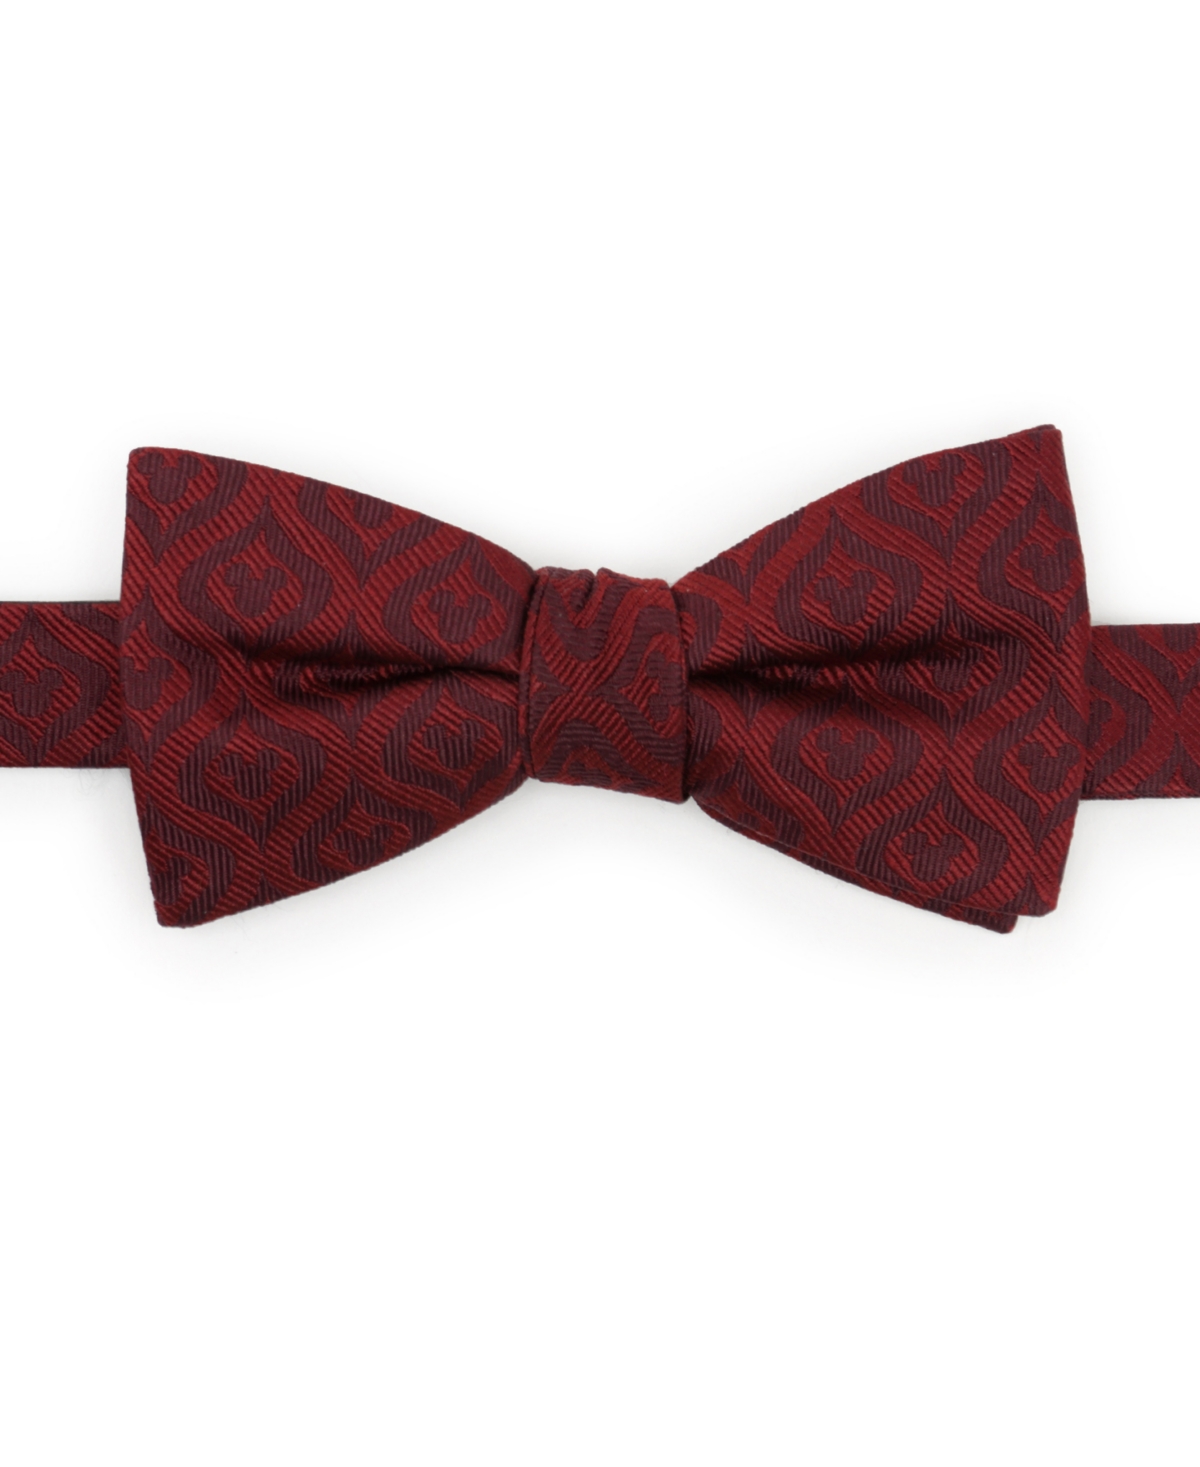 Disney Men's Mickey Mouse Holiday Bow Tie